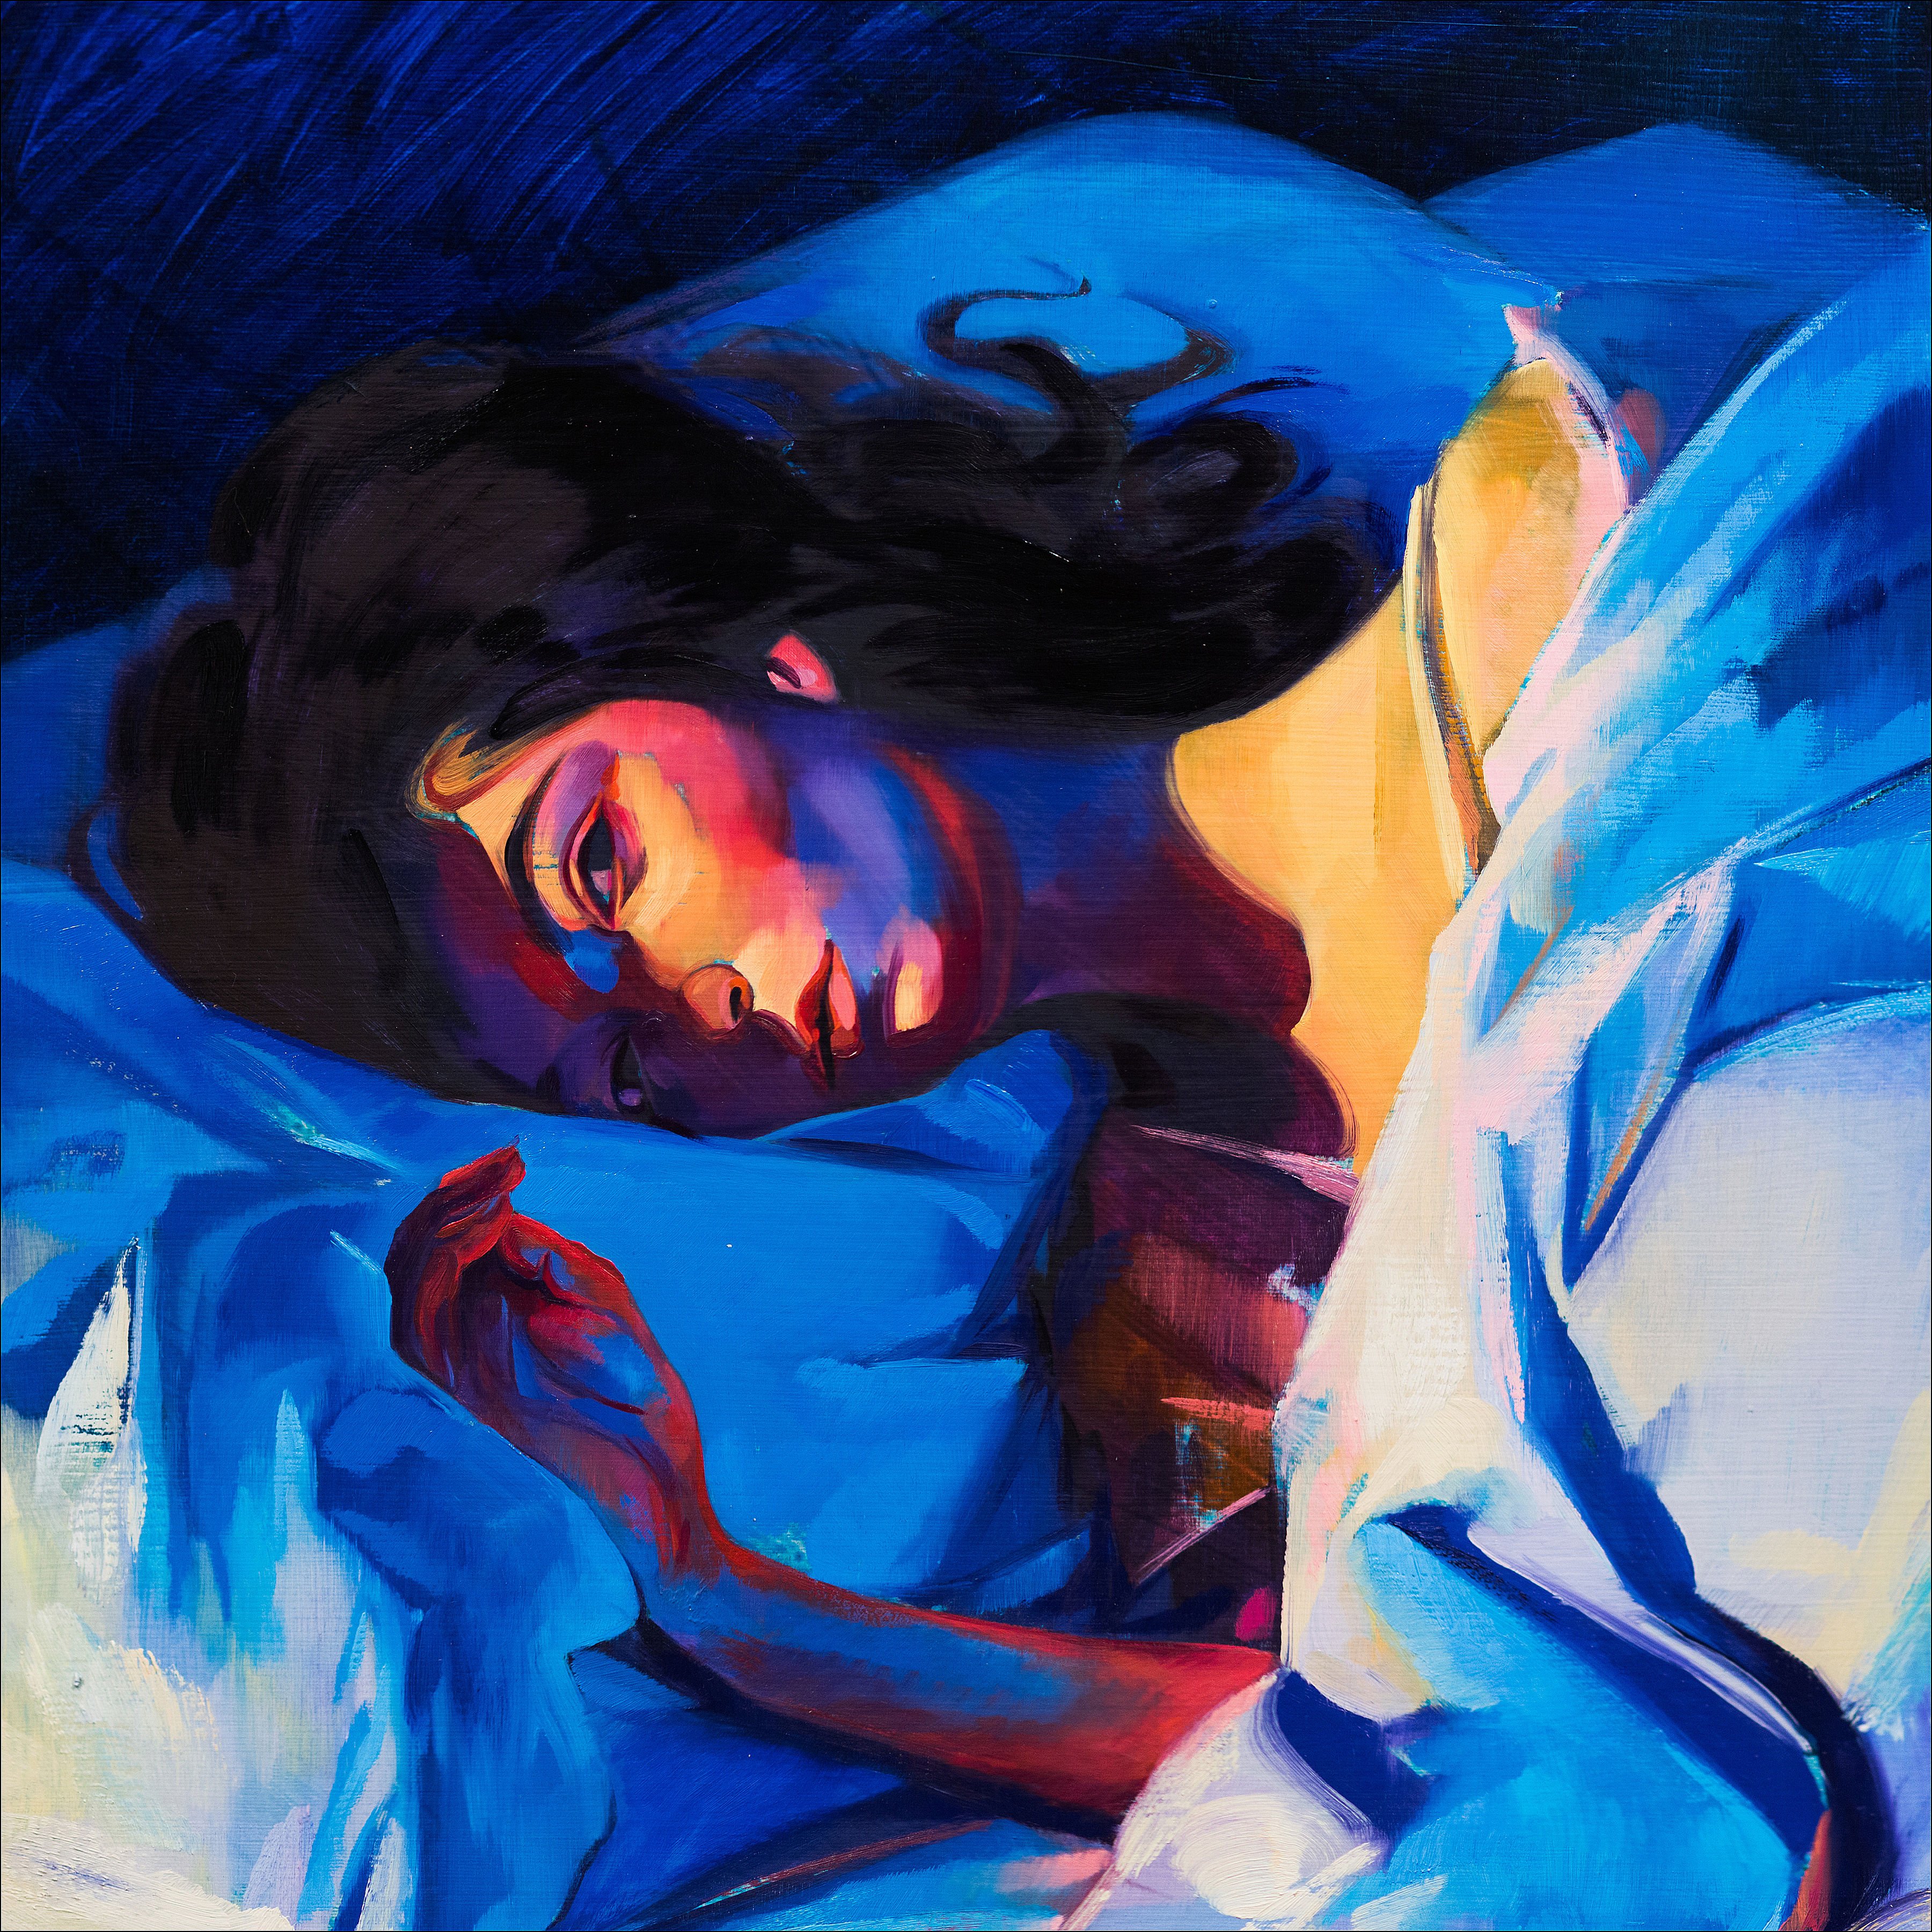 Lorde Music Face Blue In Bed Melordrama 3600x3600